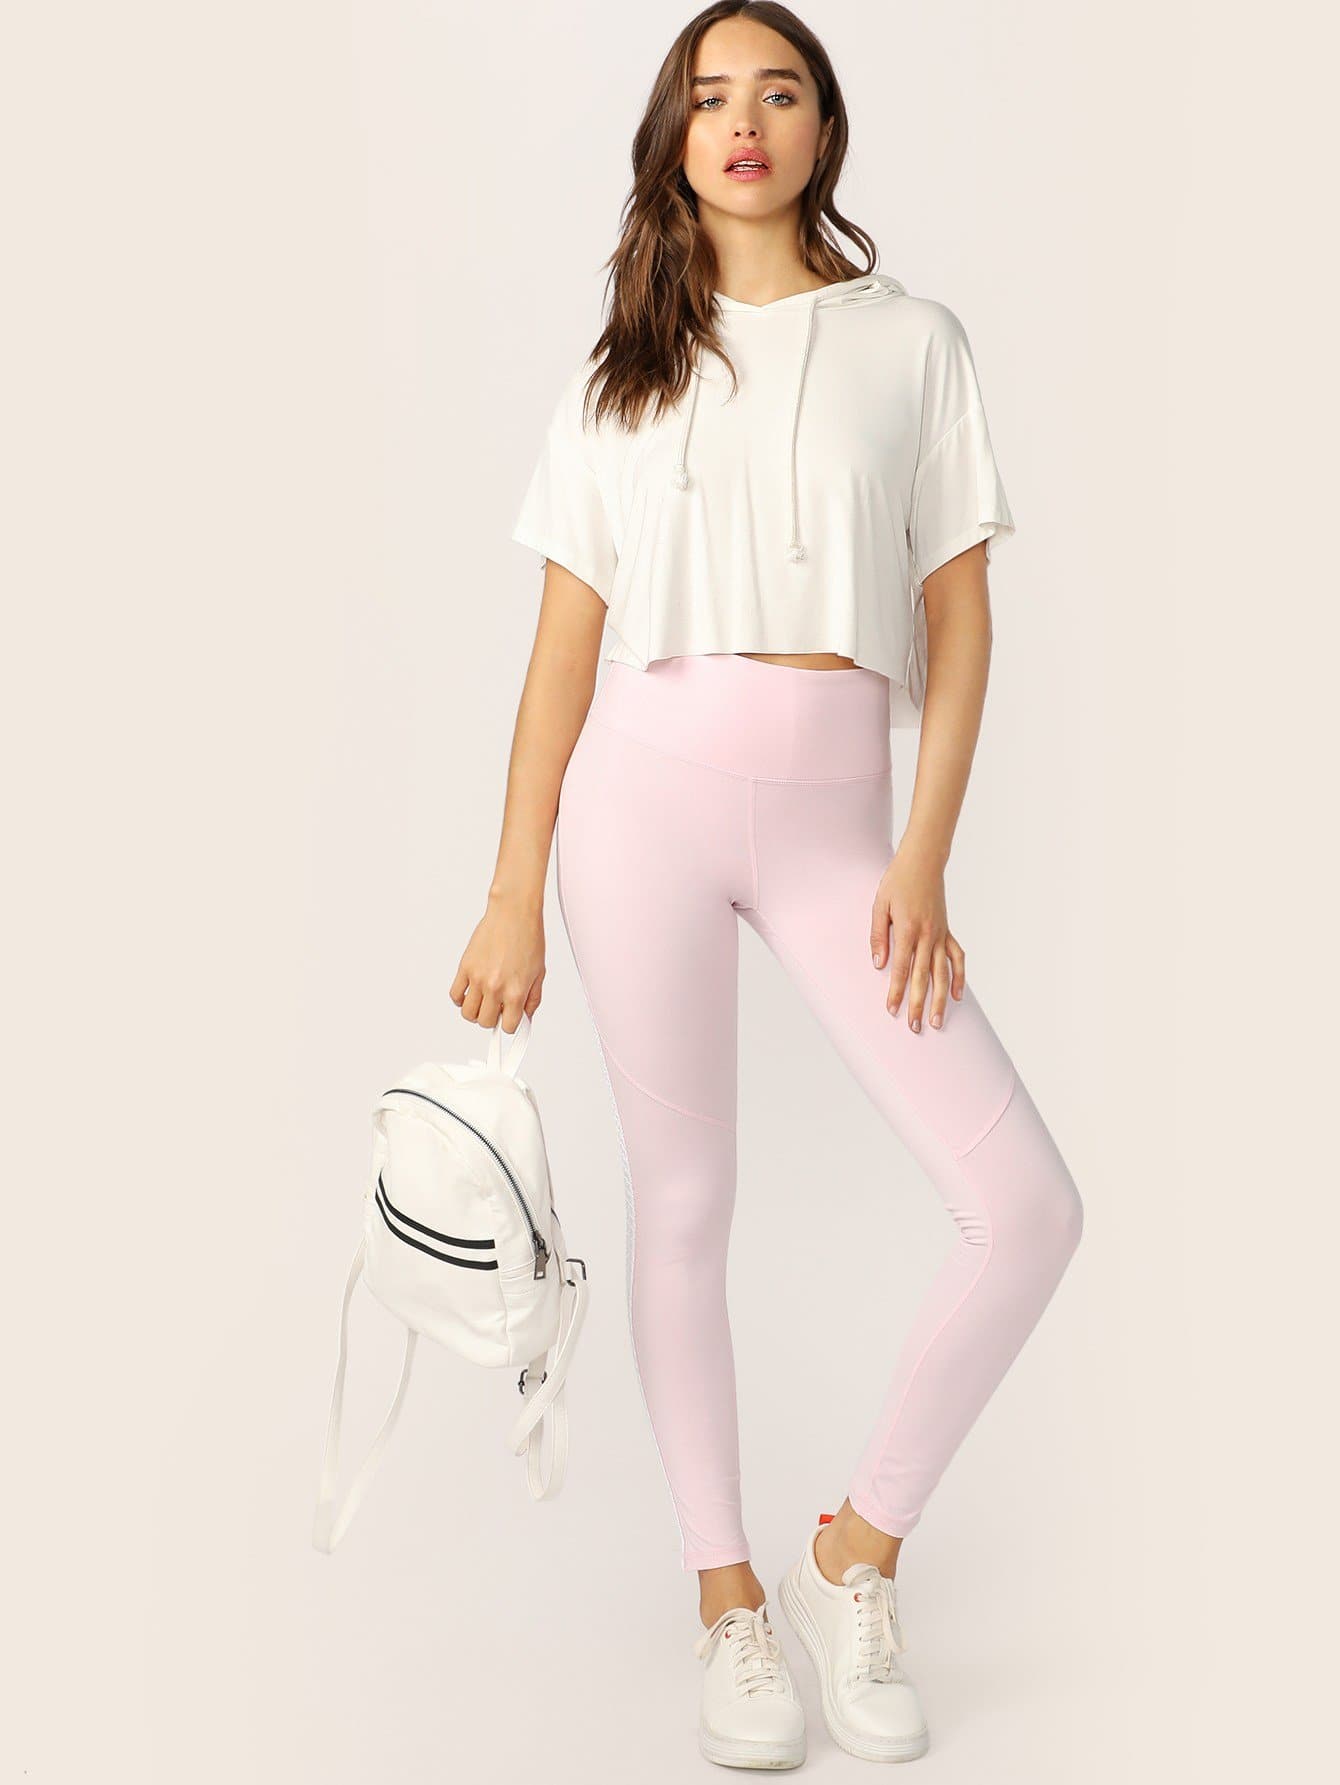 Pink Criss Cross Braided Side High Waisted Stretch Leggings